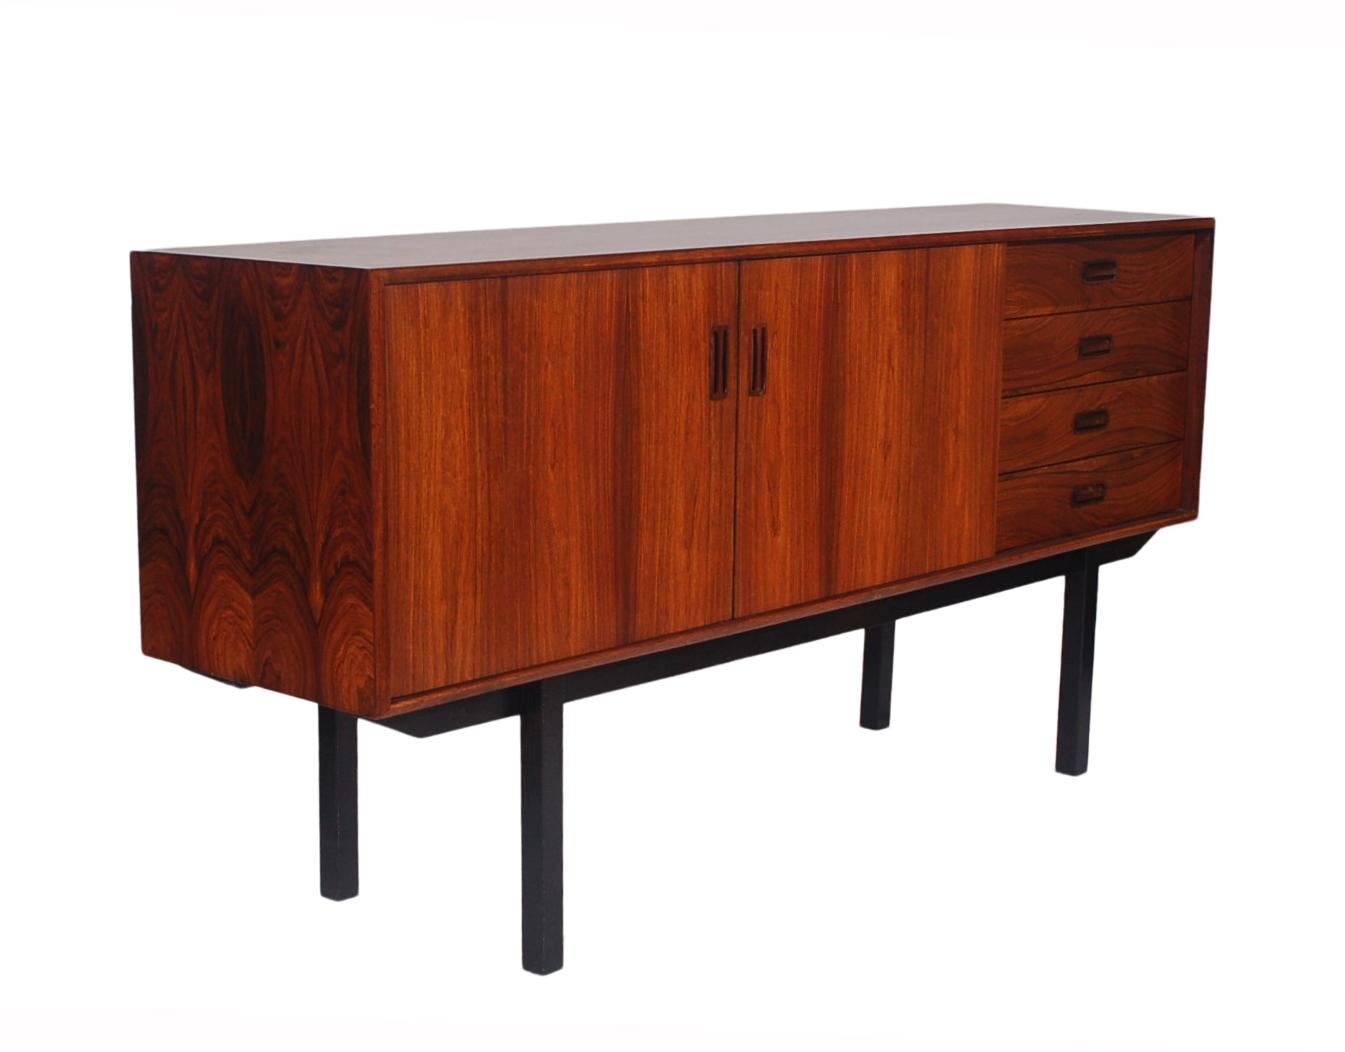 A handsome tall legged sideboard from Scandinavia circa 1970s. It features tall ebony legs with a gorgeous rosewood case. Clean condition with ample storage.